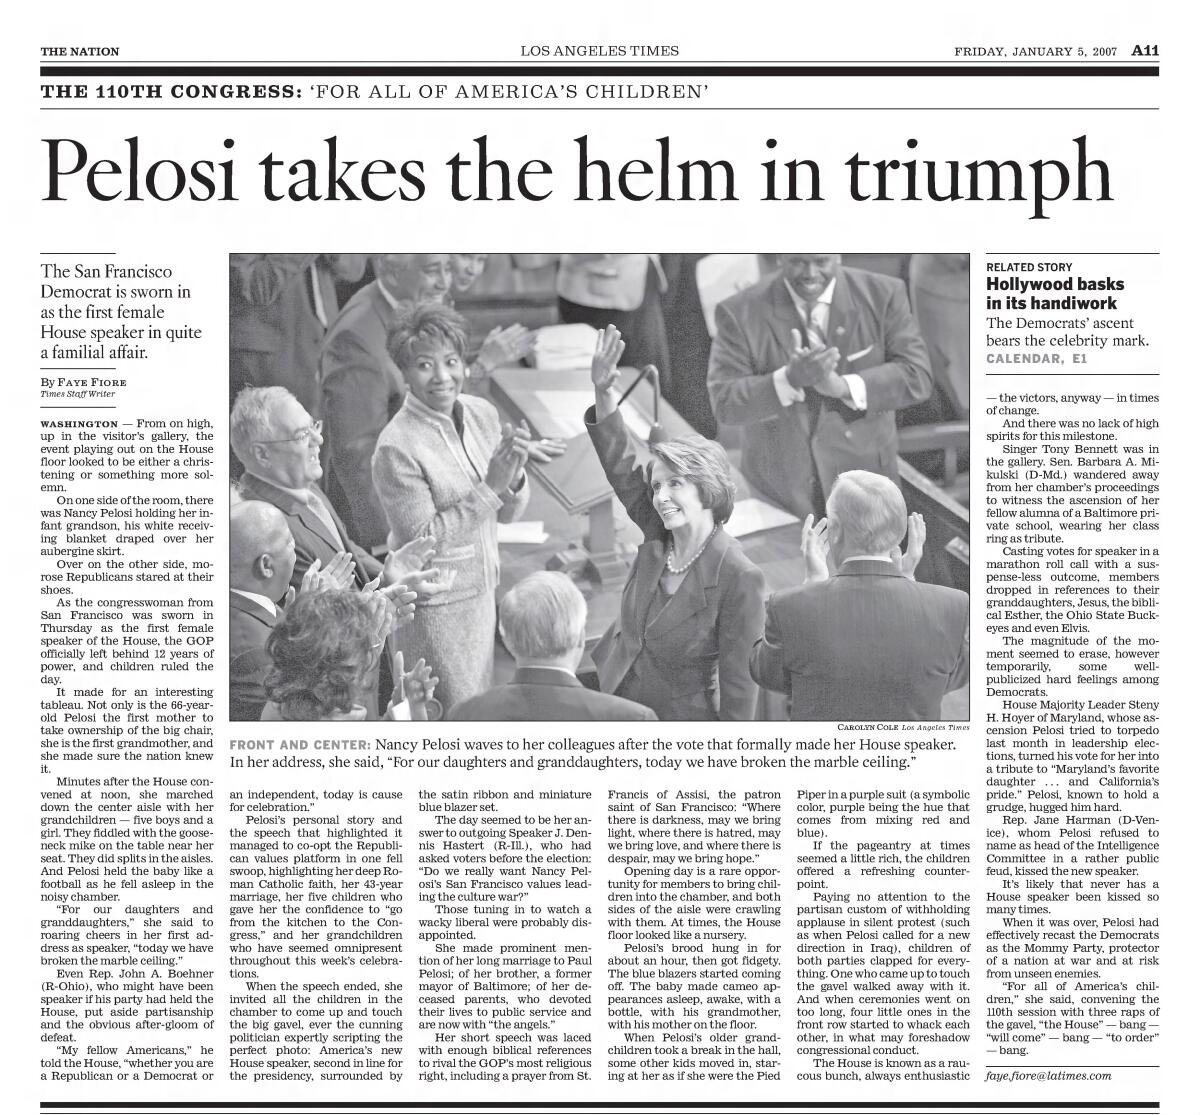 Times newspaper clipping about Nancy Pelosi becoming the first female speaker of the House